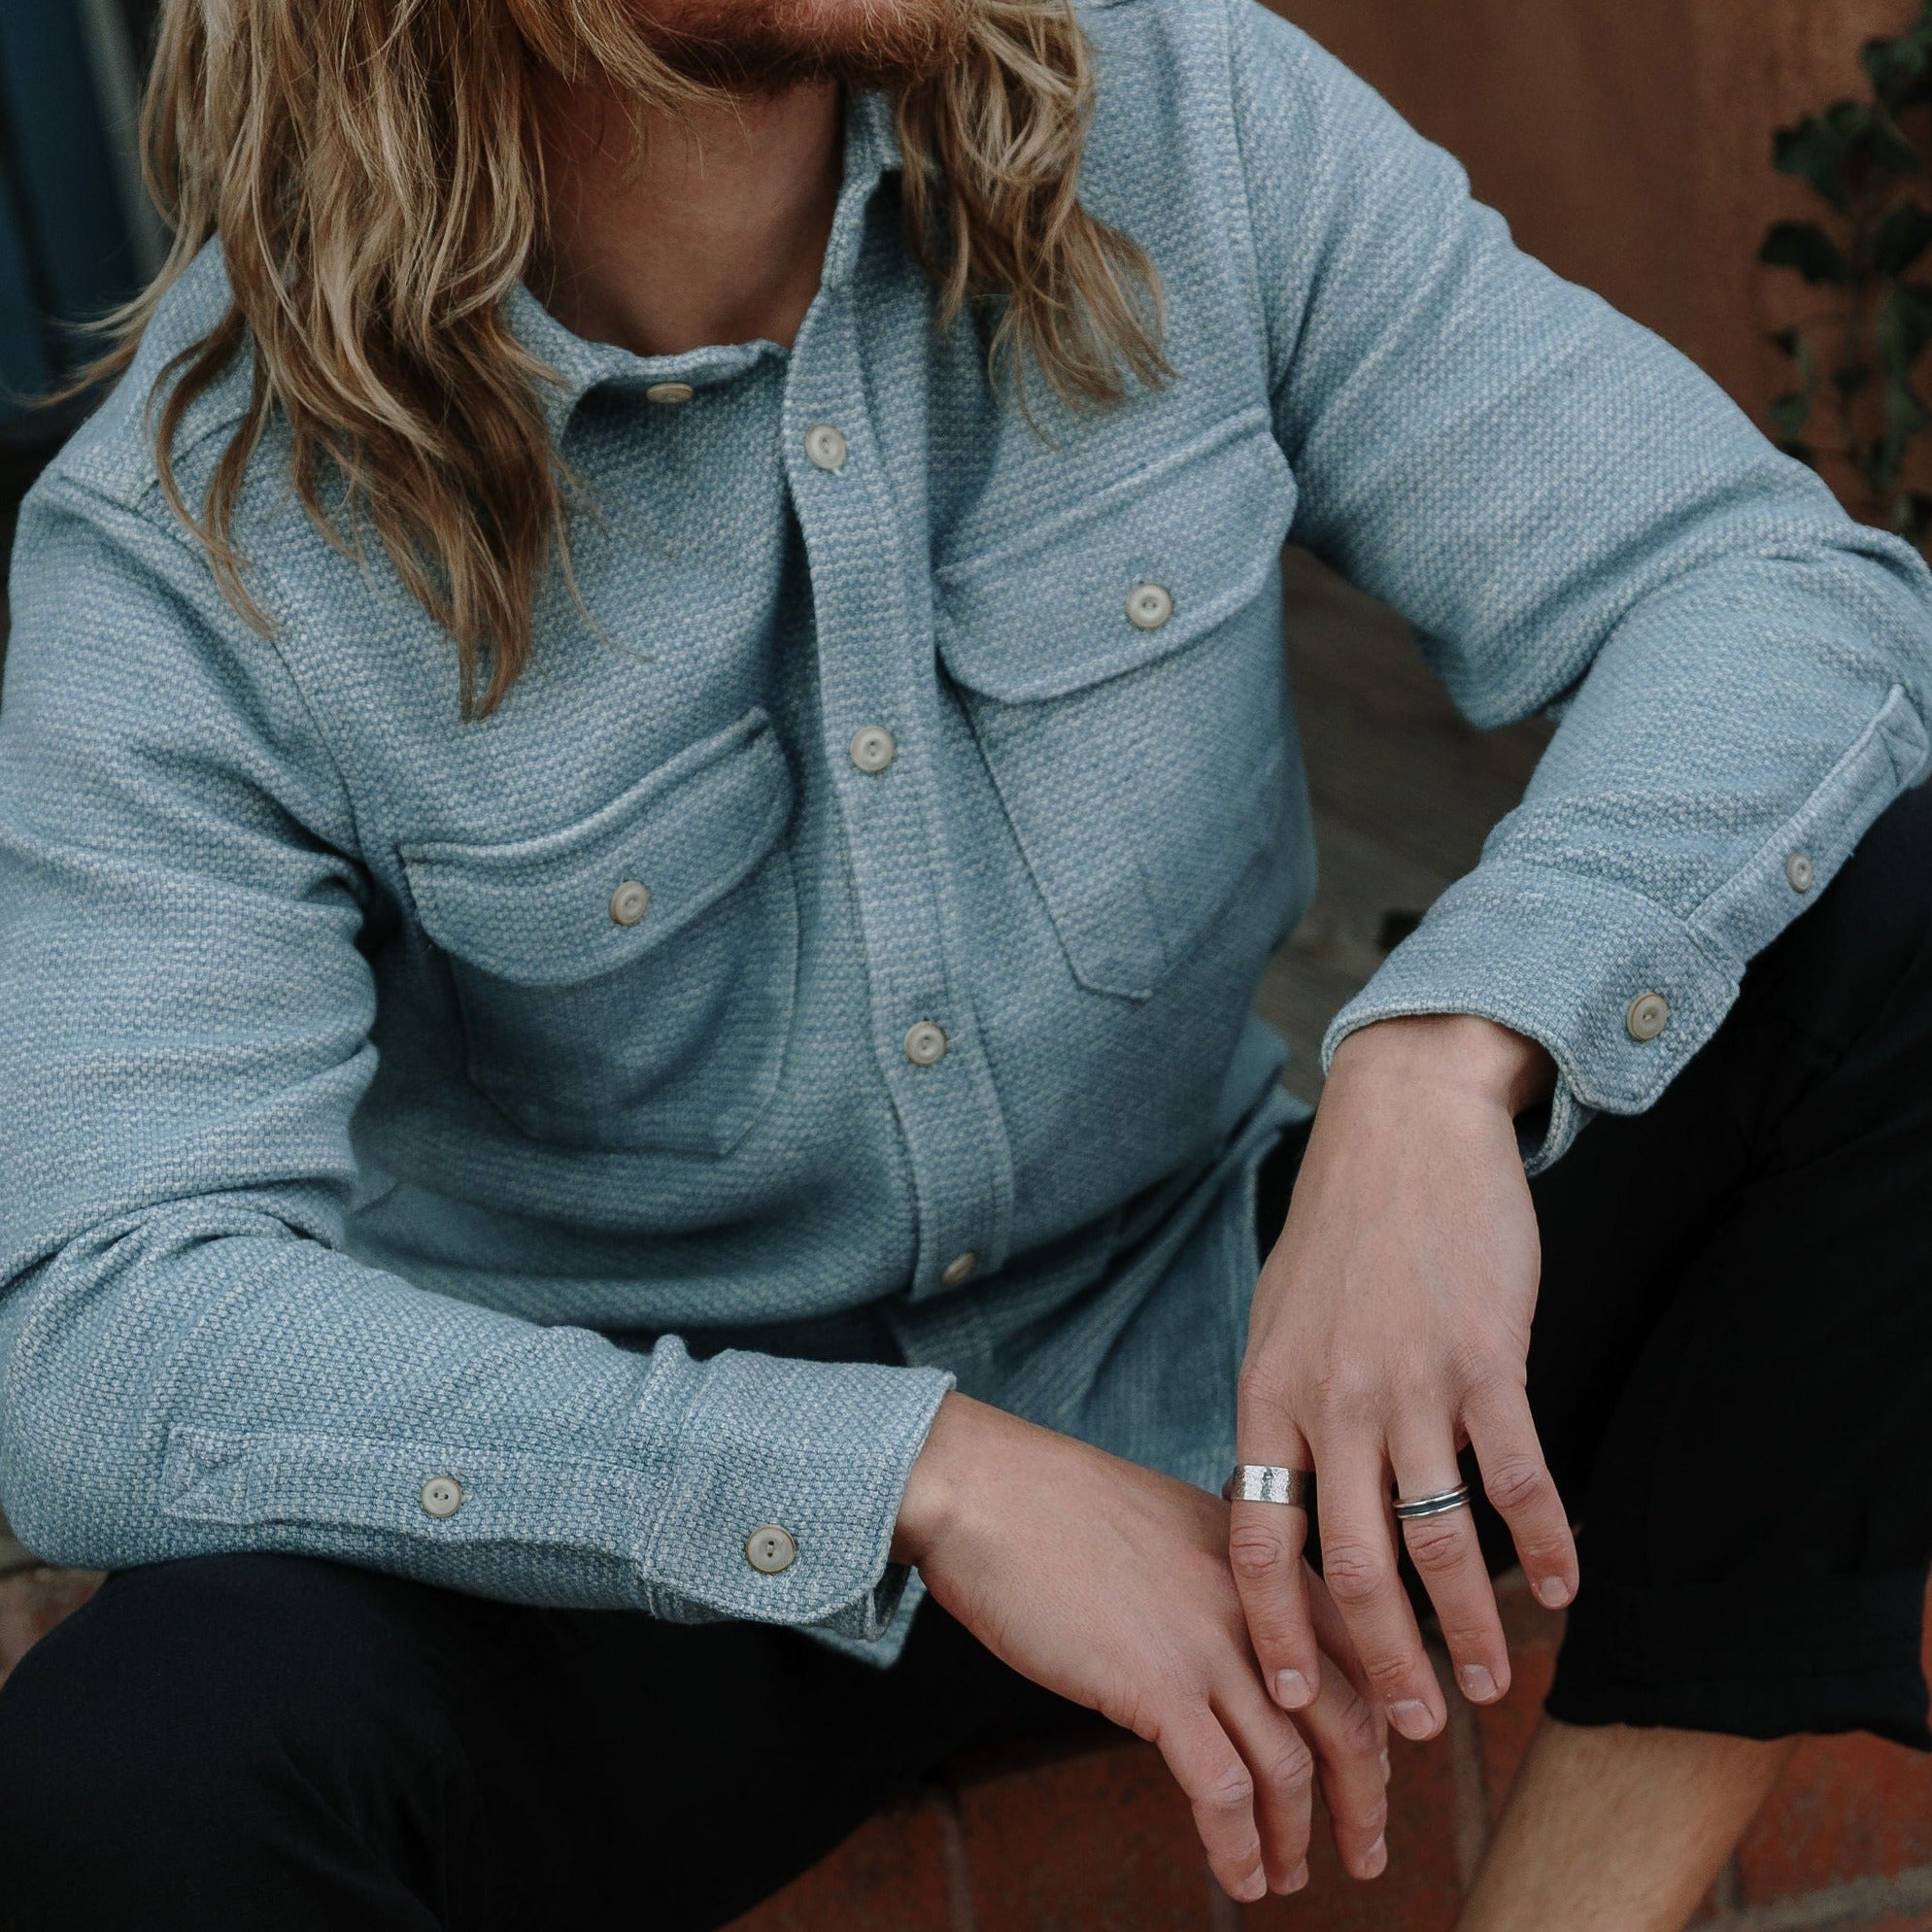 Taylor Stitch - The Division Shirt in Washed Indigo